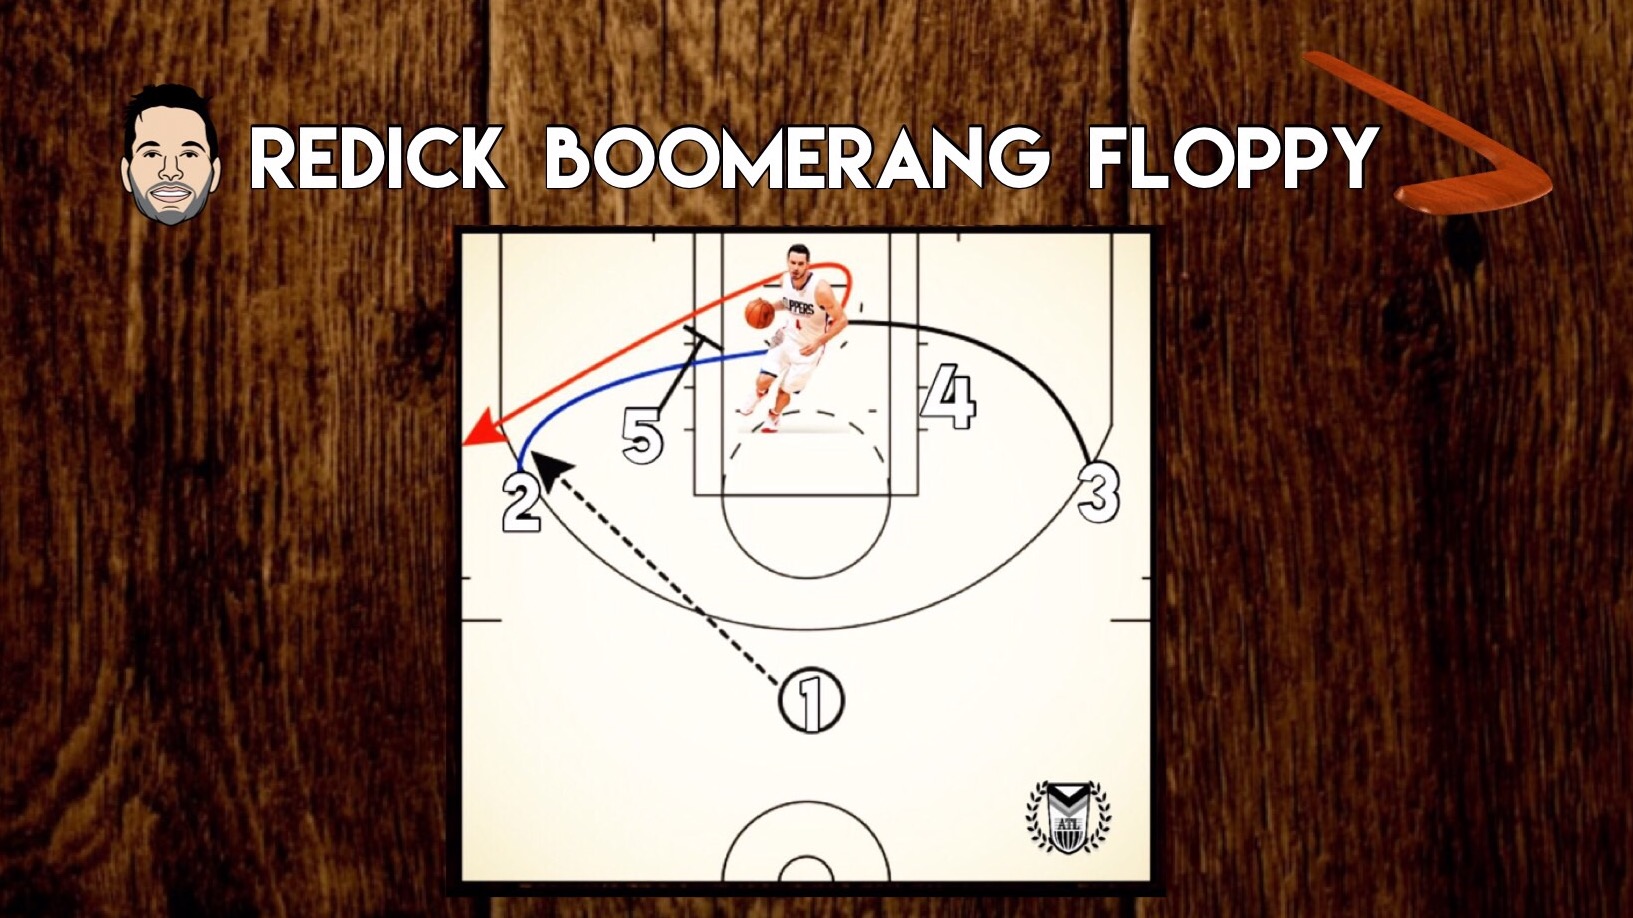 The Redick Boomerang Route